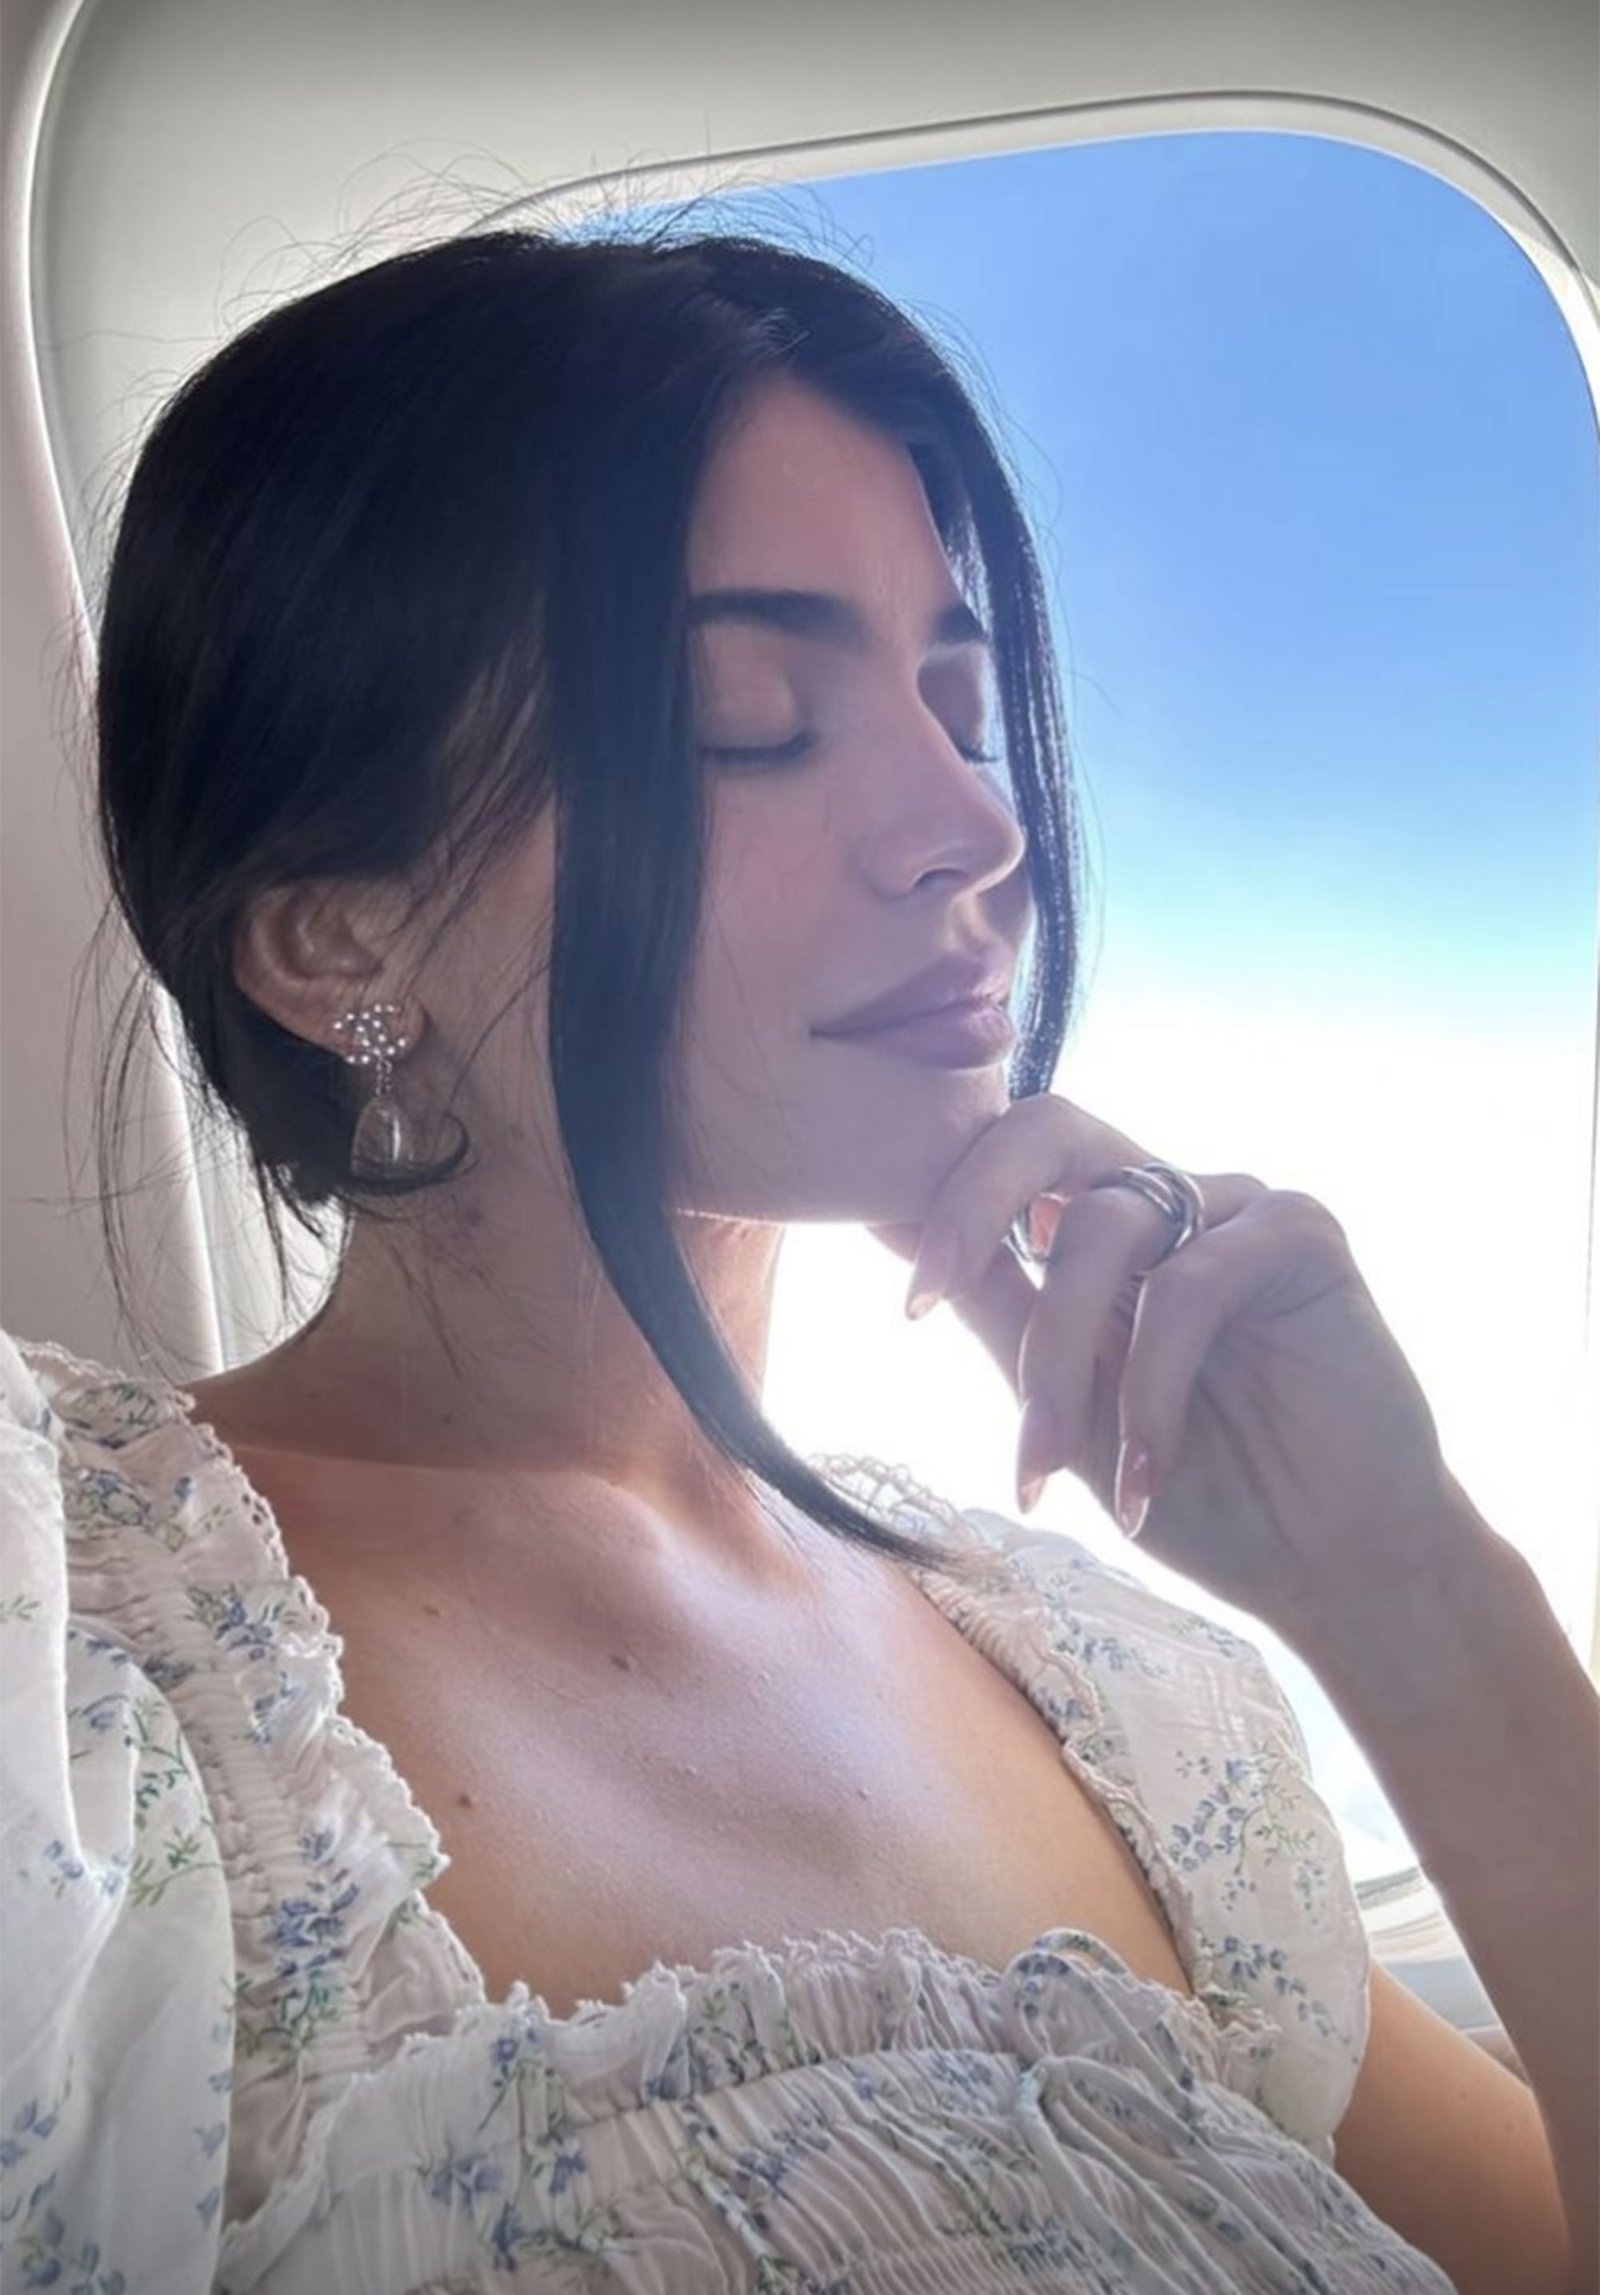 A selfie of Kylie Jenner on a private jet.